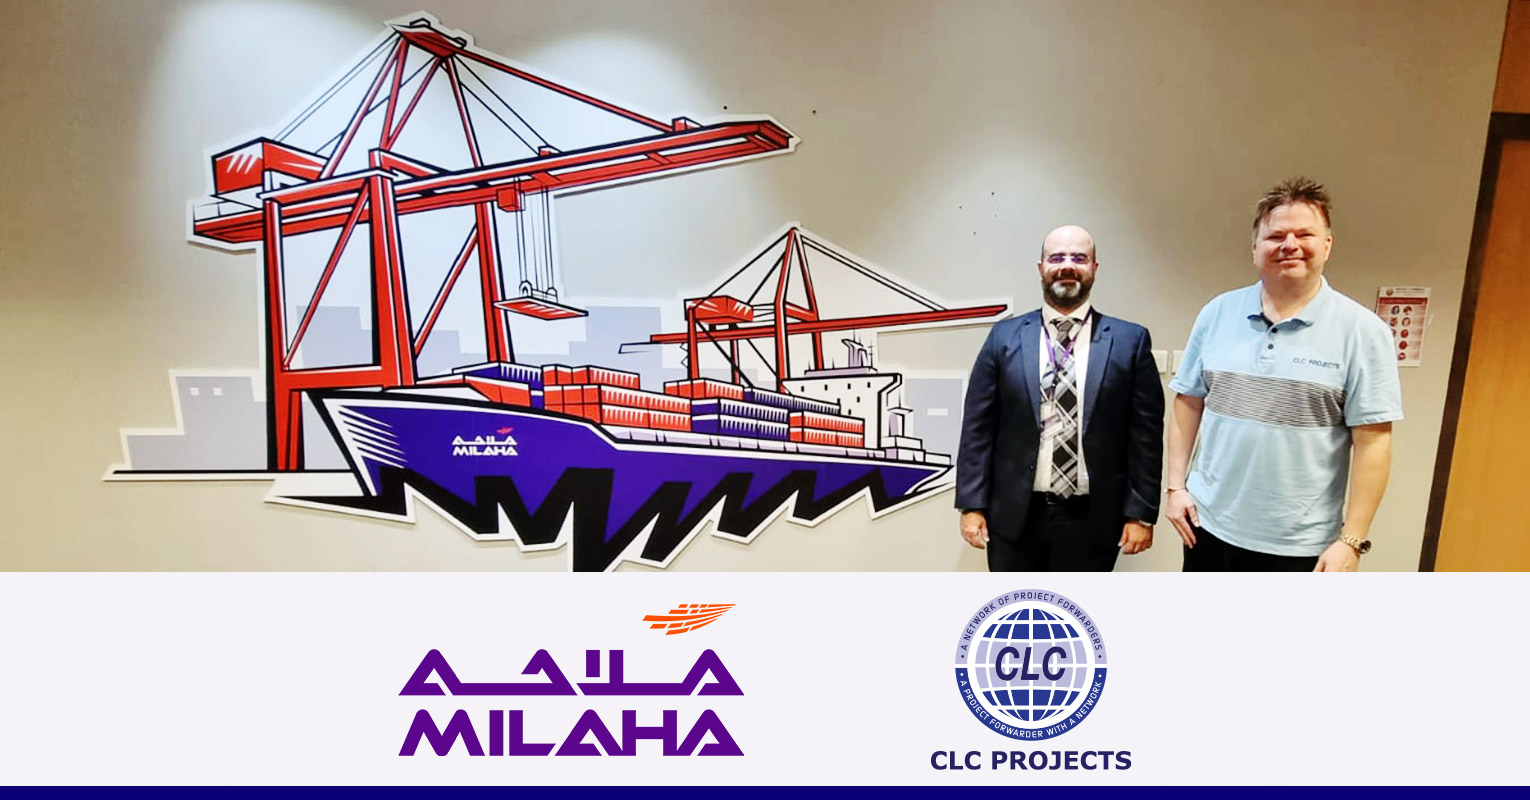 CLC Projects Chairman met with Elias Abou Jawdeh, Senior Manager - Commercial at Milaha in Doha, Qatar